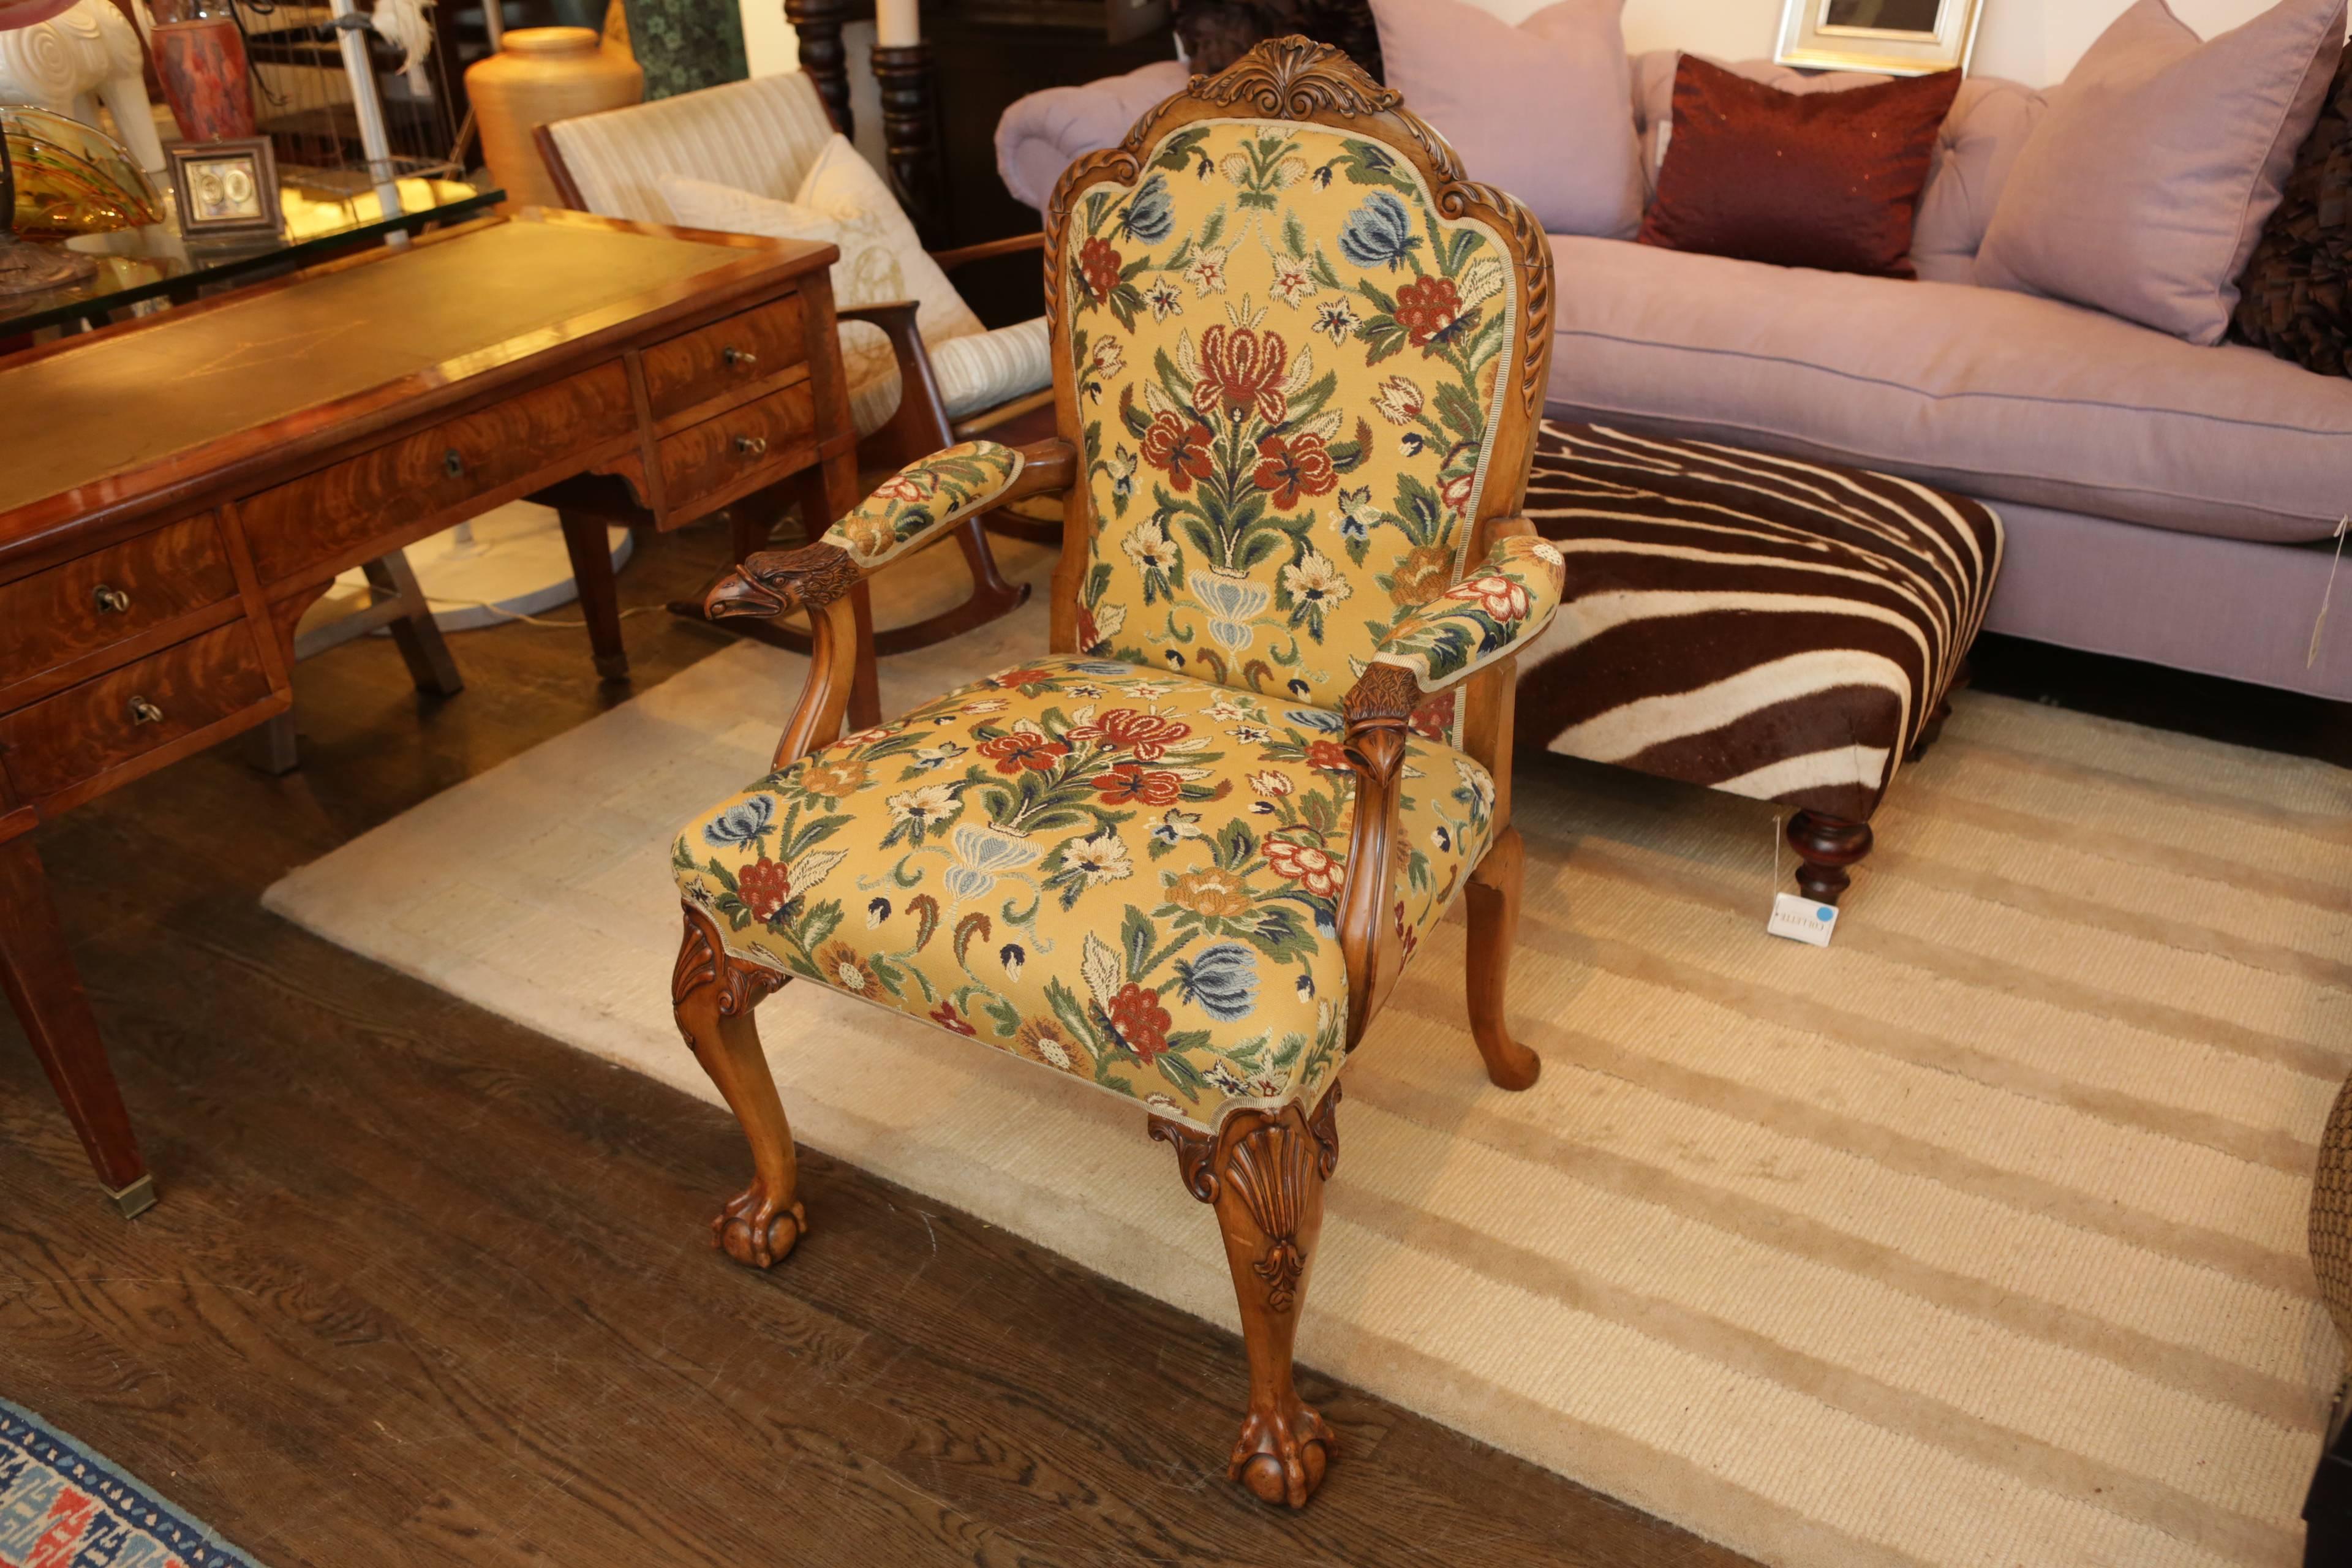 A unique and handsome 18th century styled hand-carved walnut armchair with floral tapestry-weave upholstery. Features carved eagle head arm rests with matching upholstery, and ball and clawed feet.